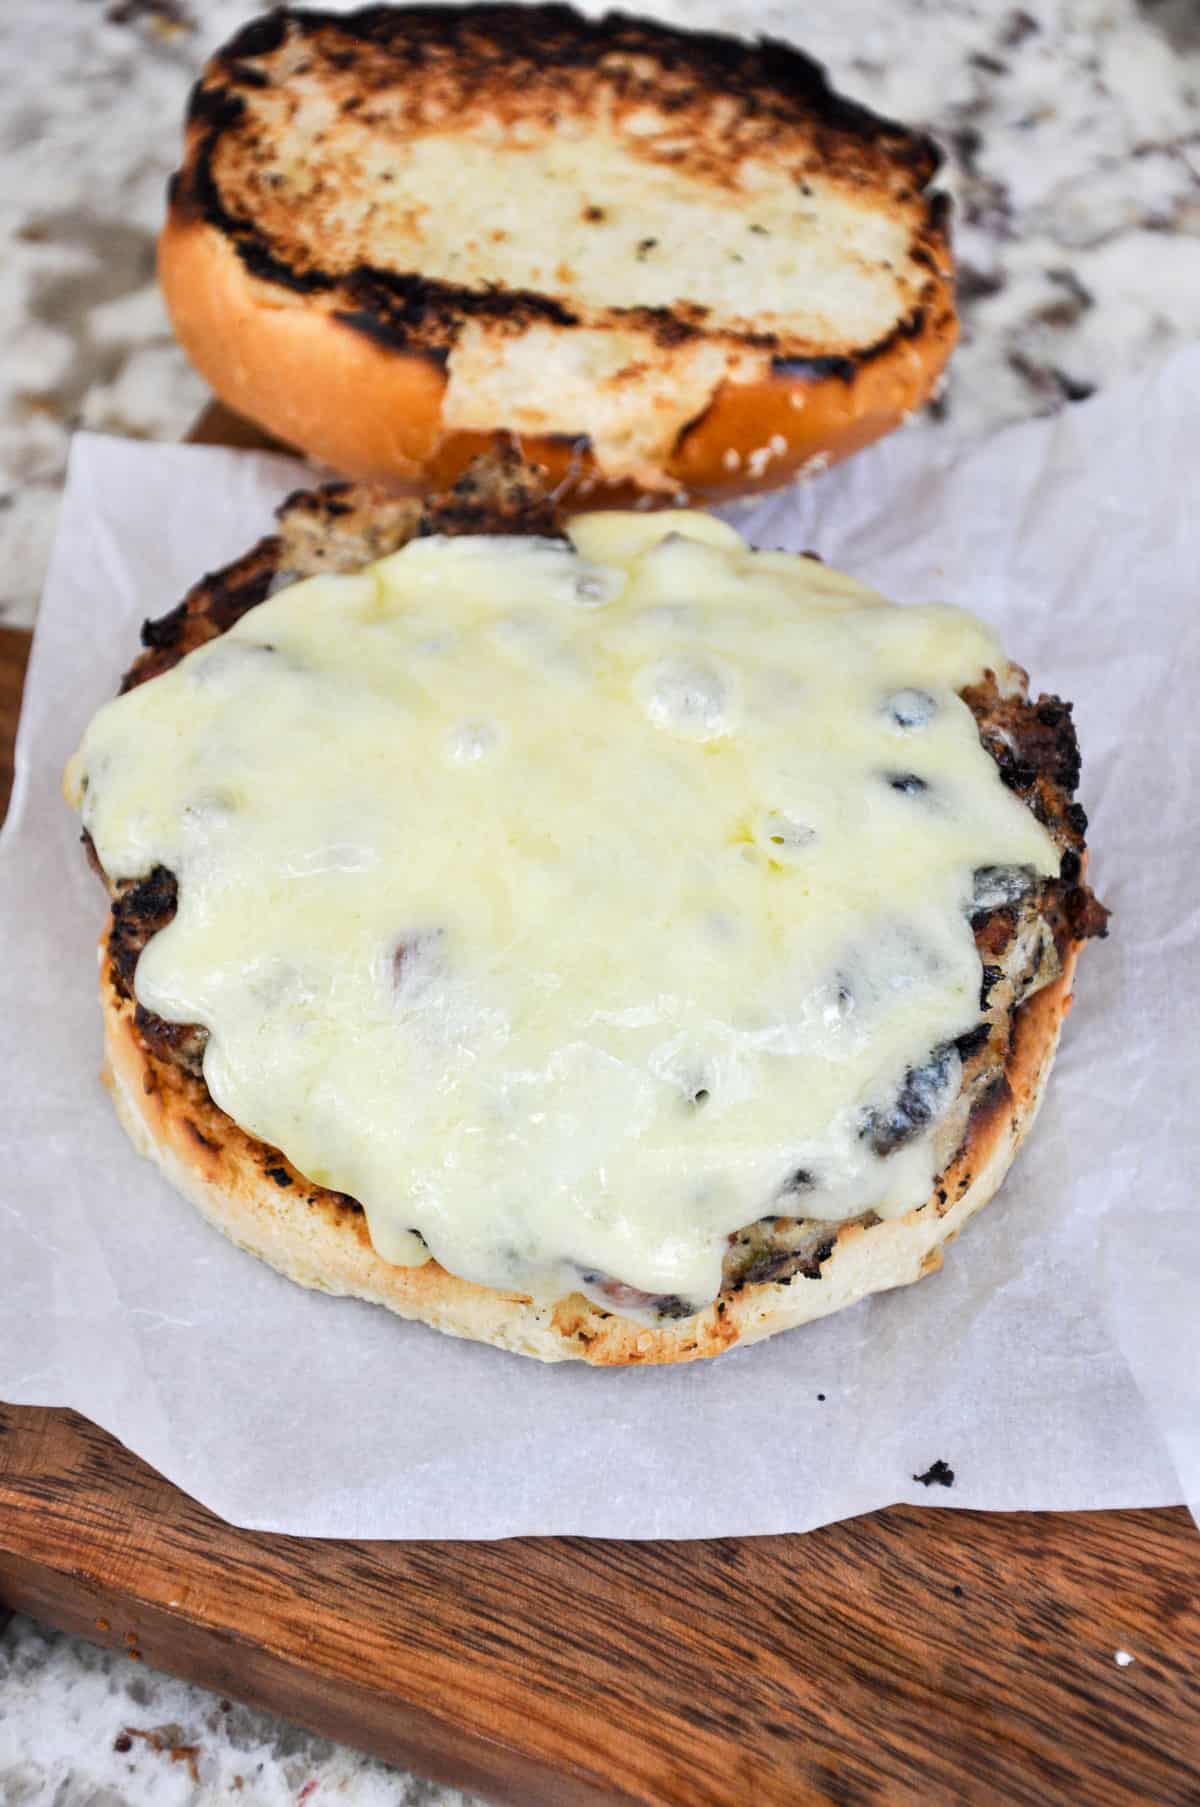 White cheddar cheese melted over turkey patty 